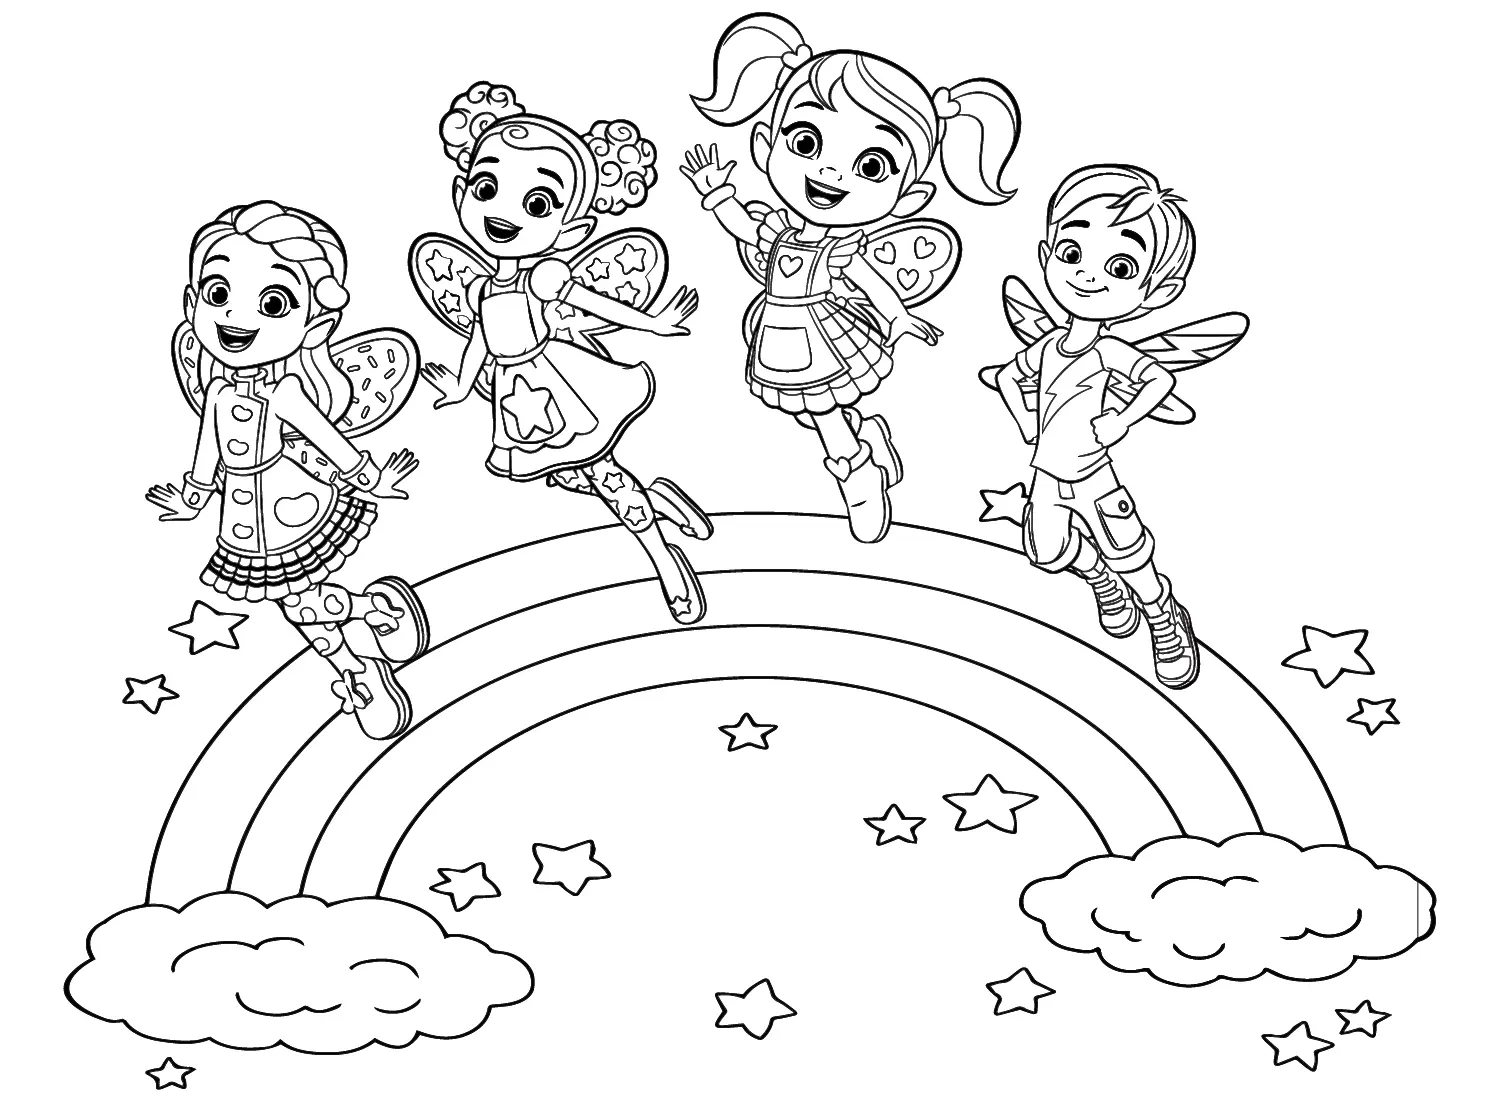 Butterbean s Cafe Coloring Pages